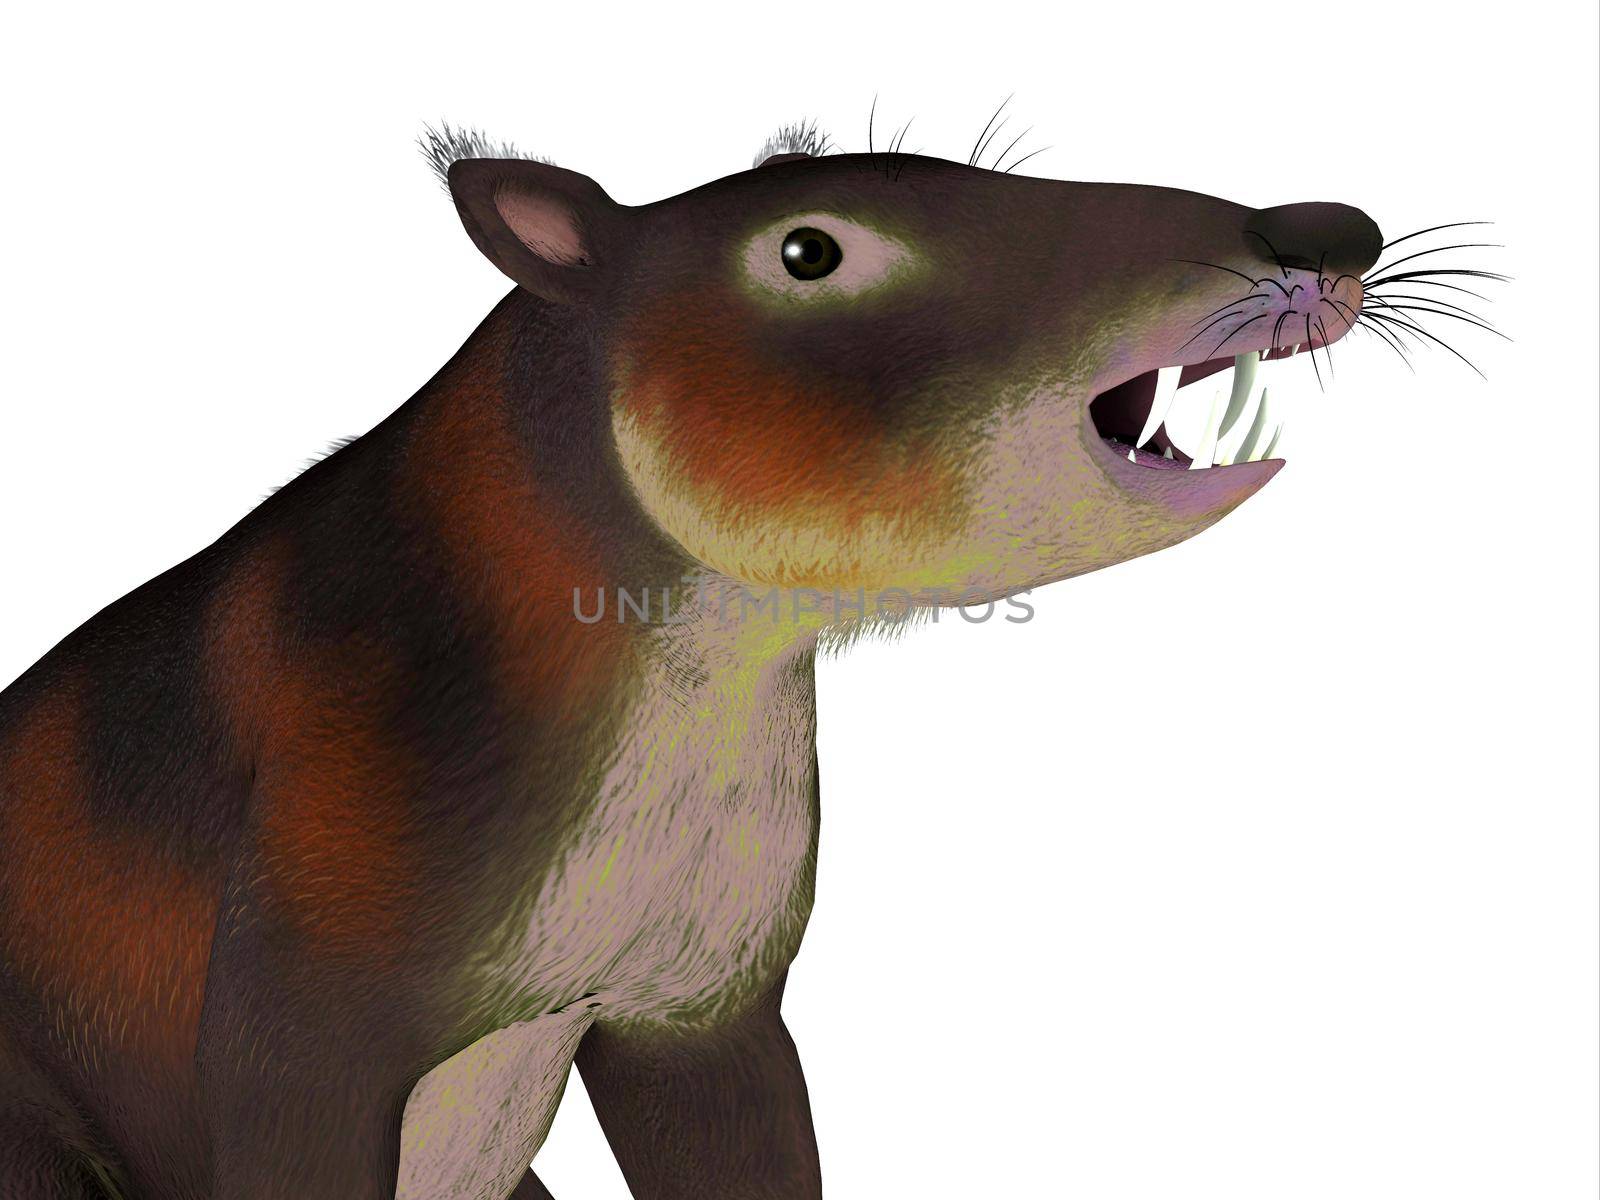 Cronopio is an extinct carnivorous mammal that lived in South America during the Cretaceous Period.